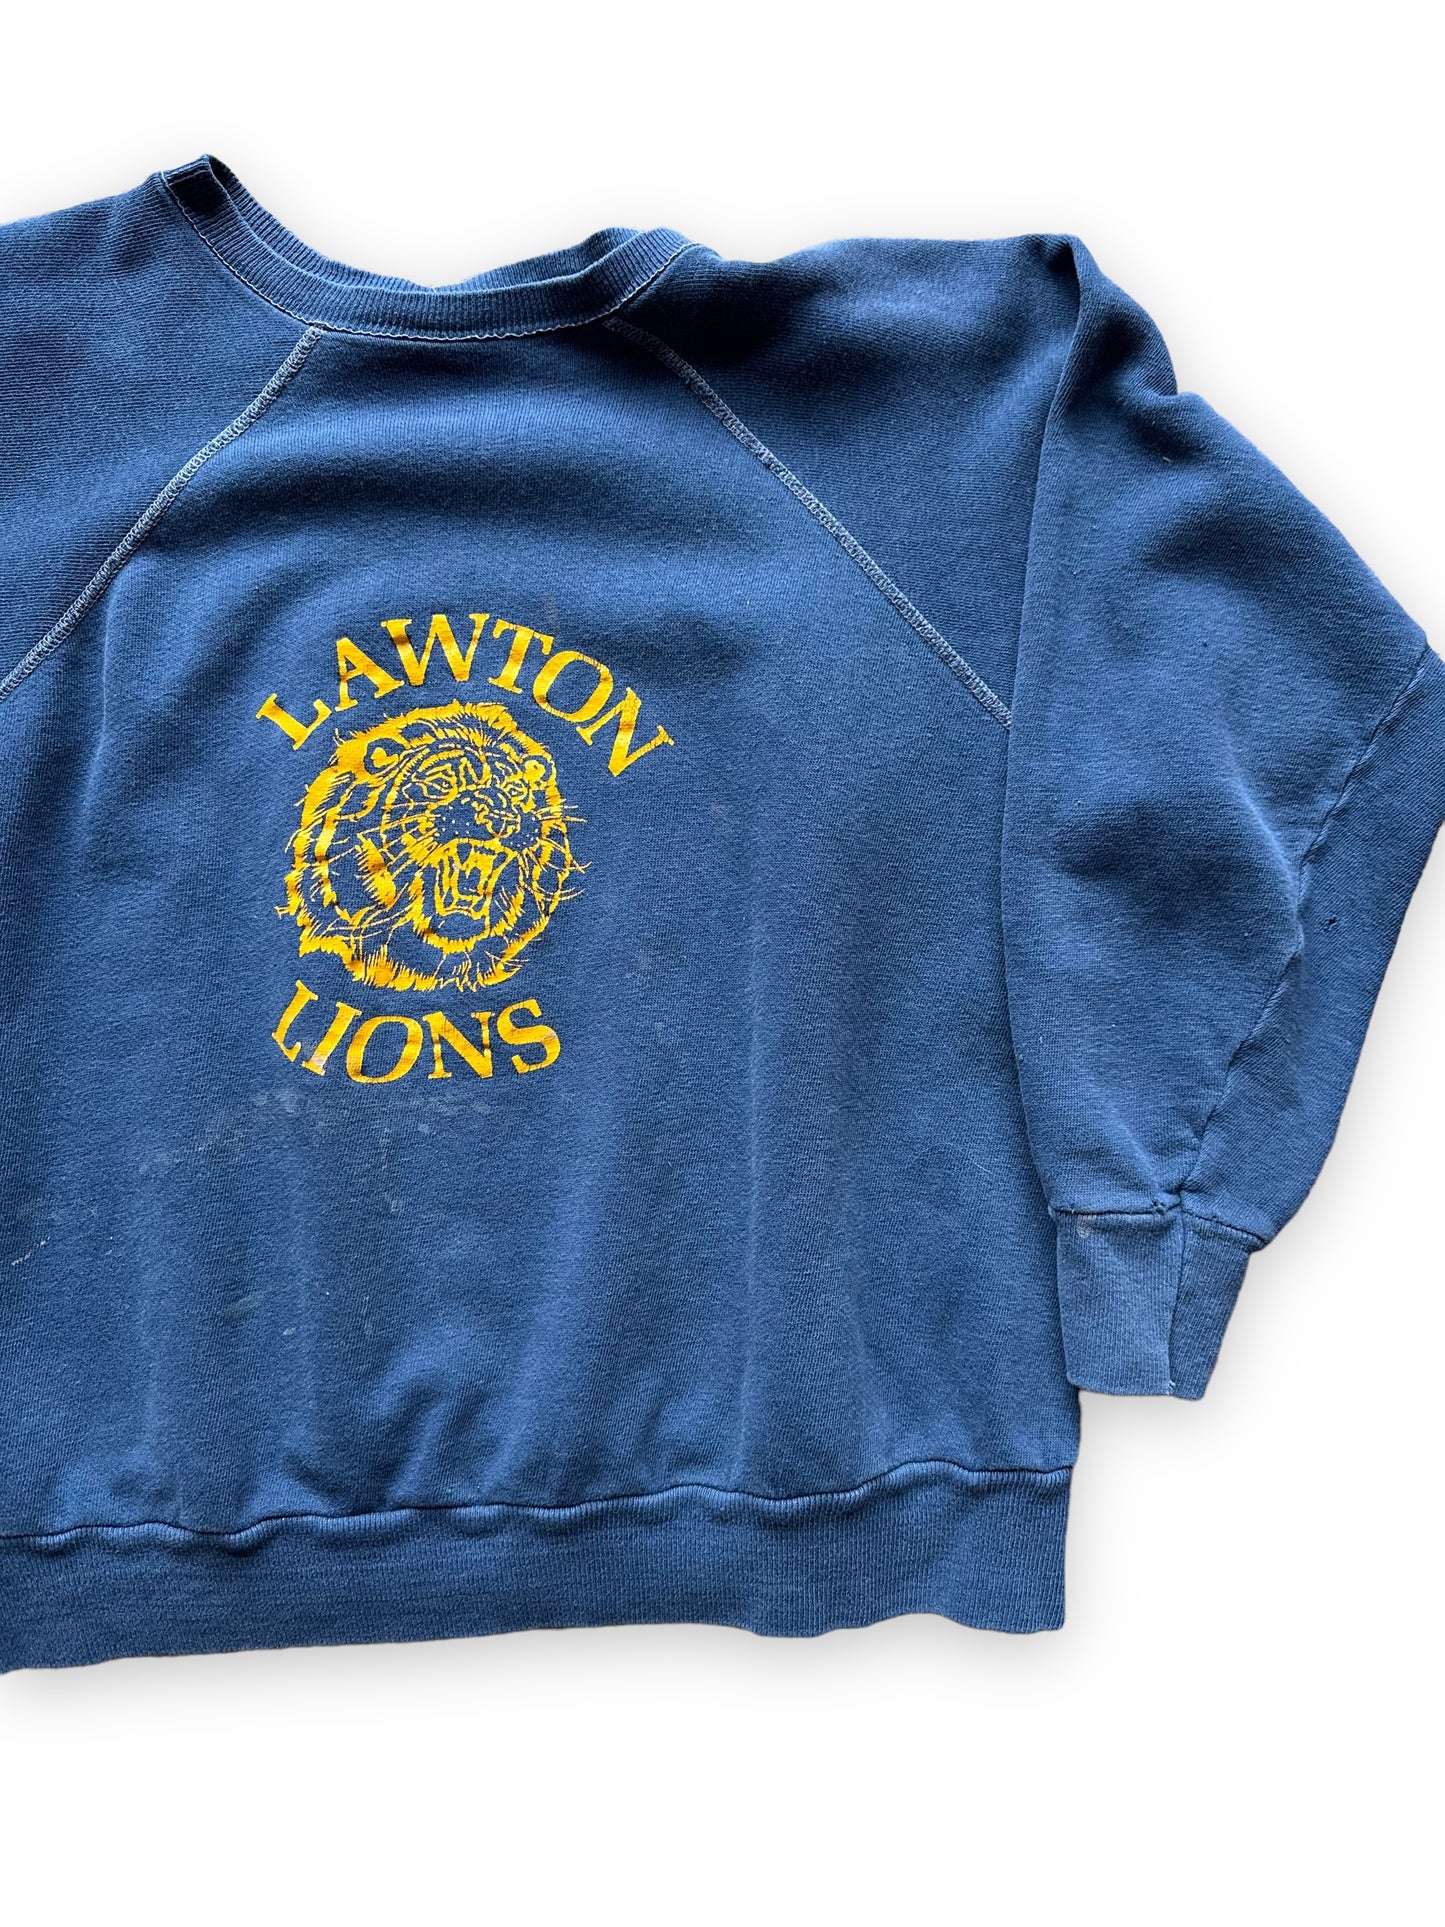 Front Left View on Vintage Small Lawton Lions Crewneck Sweatshirt | Vintage Crewneck Sweatshirt Seattle | Barn Owl Vintage Clothing